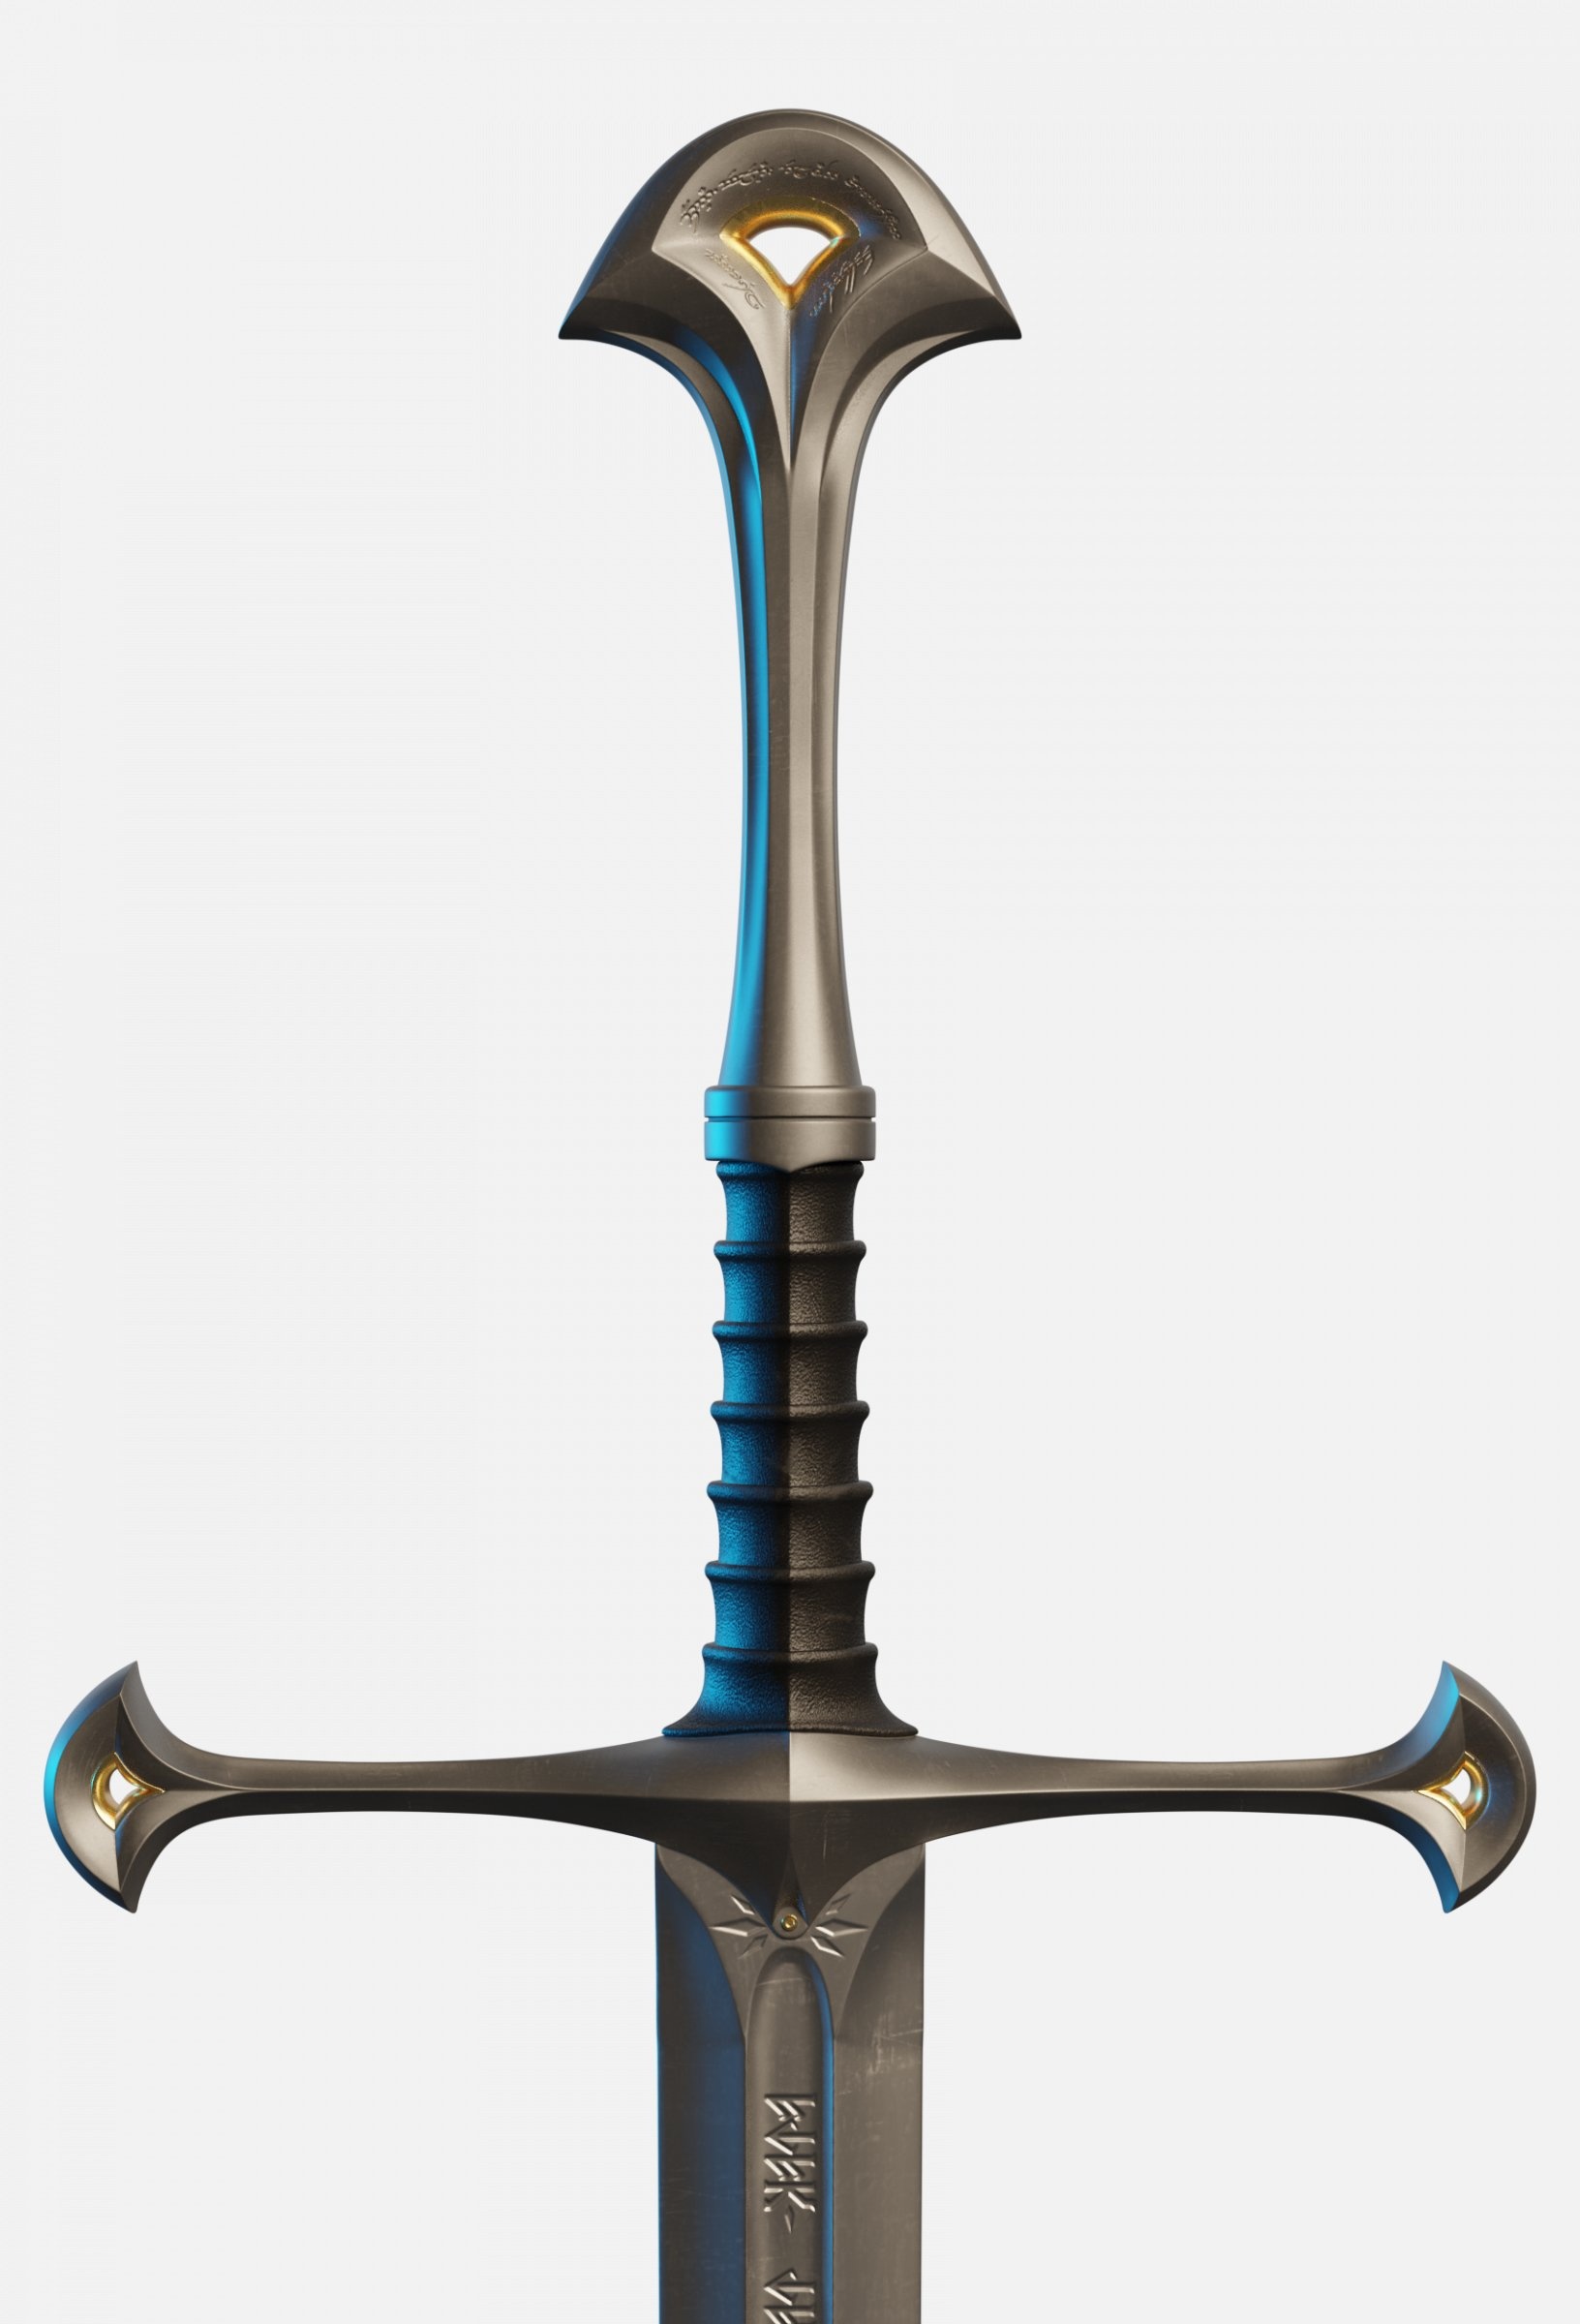 Narsil Sword, Flame of the West, 3D model download, Exquisite craftsmanship, 1640x2400 HD Phone